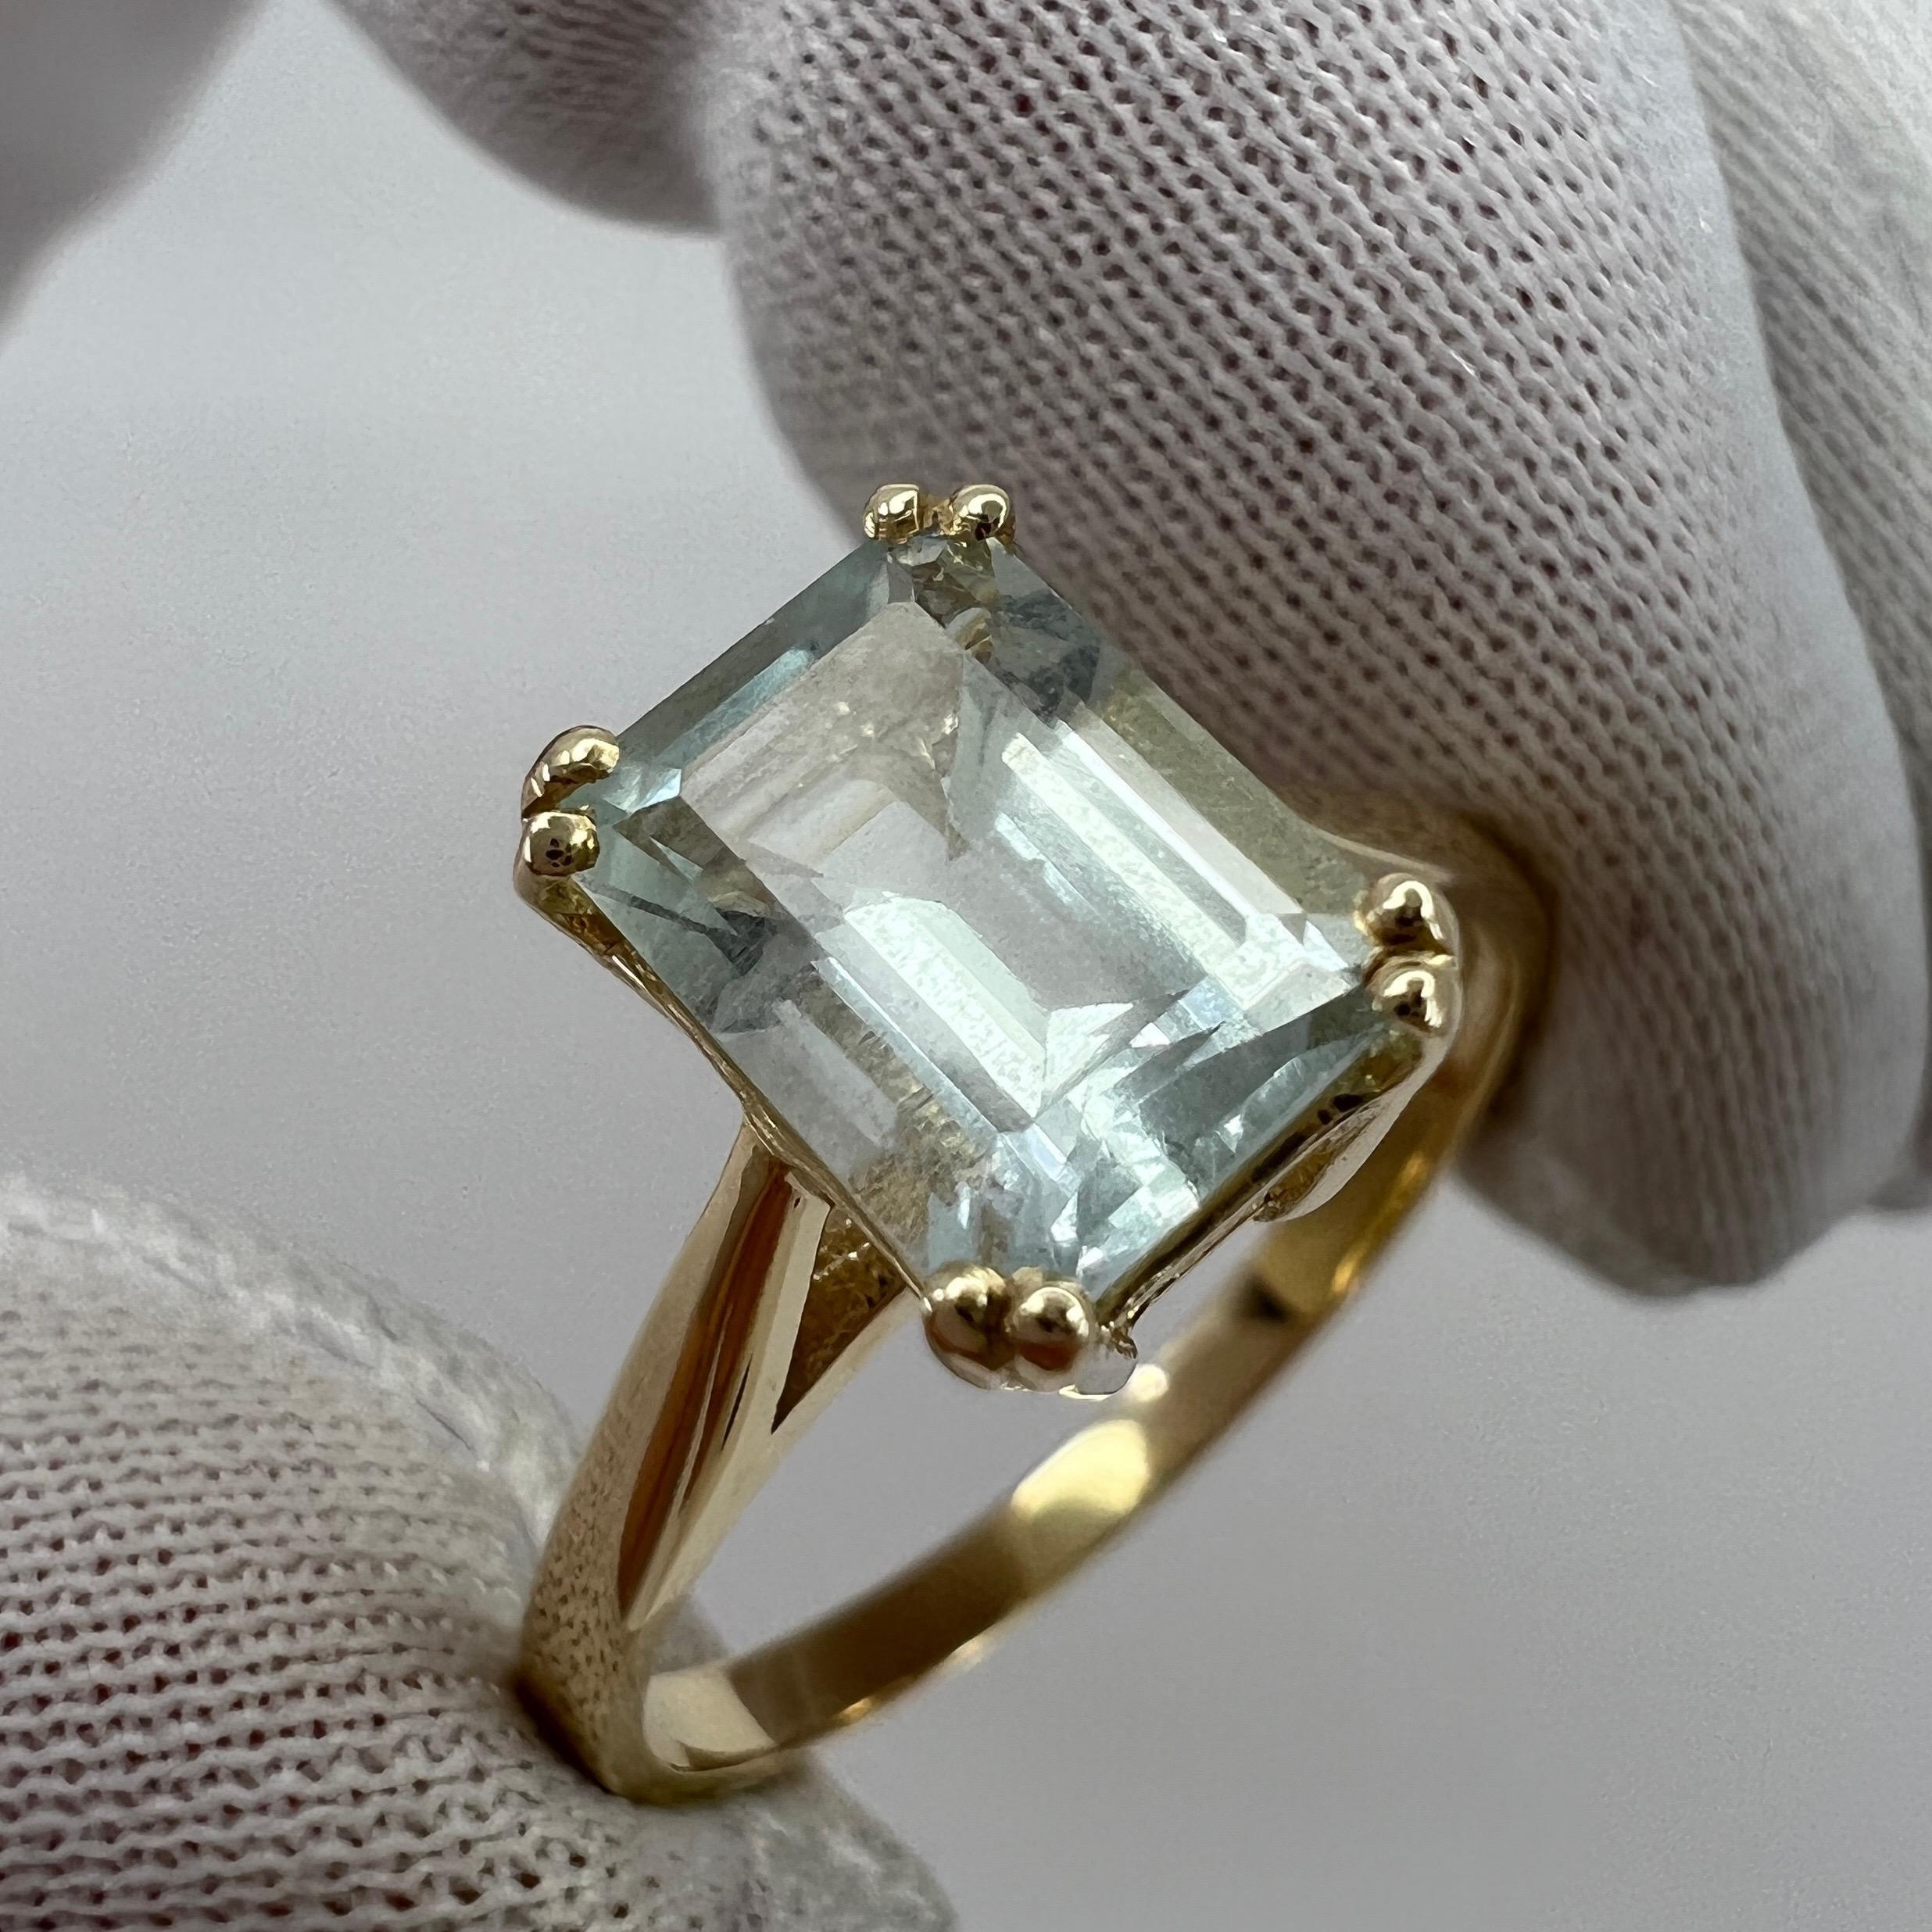 Light Blue Emerald Cut Aquamarine Solitaire Yellow Gold Ring.

1.50 Carat aquamarine with a stunning bright blue colour and good clarity, some small natural inclusions visible (as shown in photos) but not a dirty stone. 

Also has an excellent